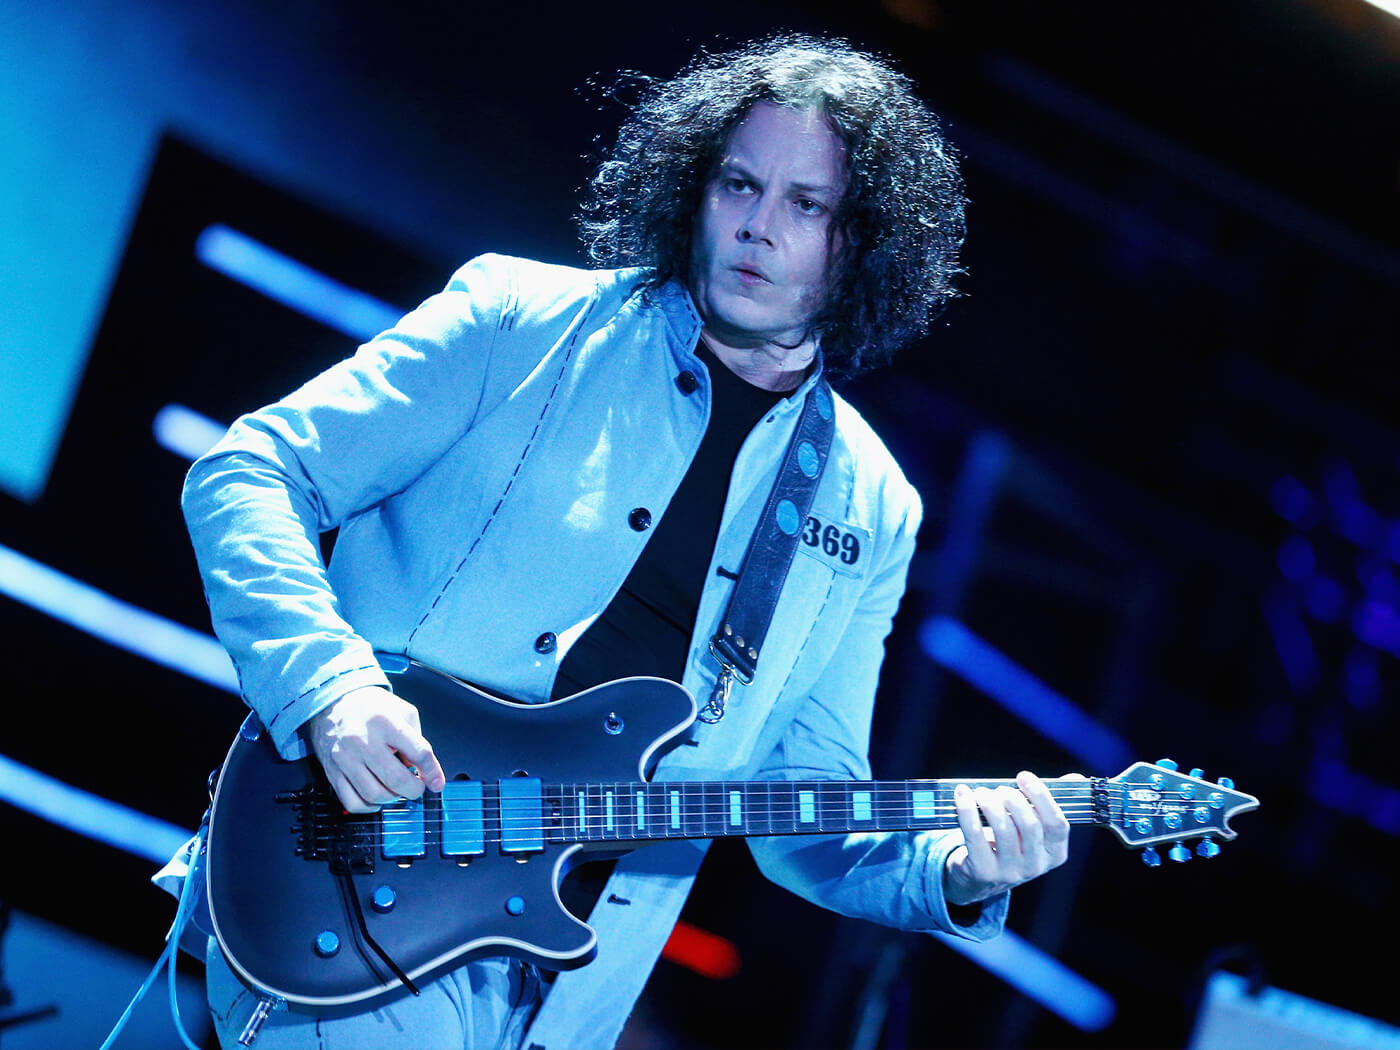 Jack White onstage with EVH guita